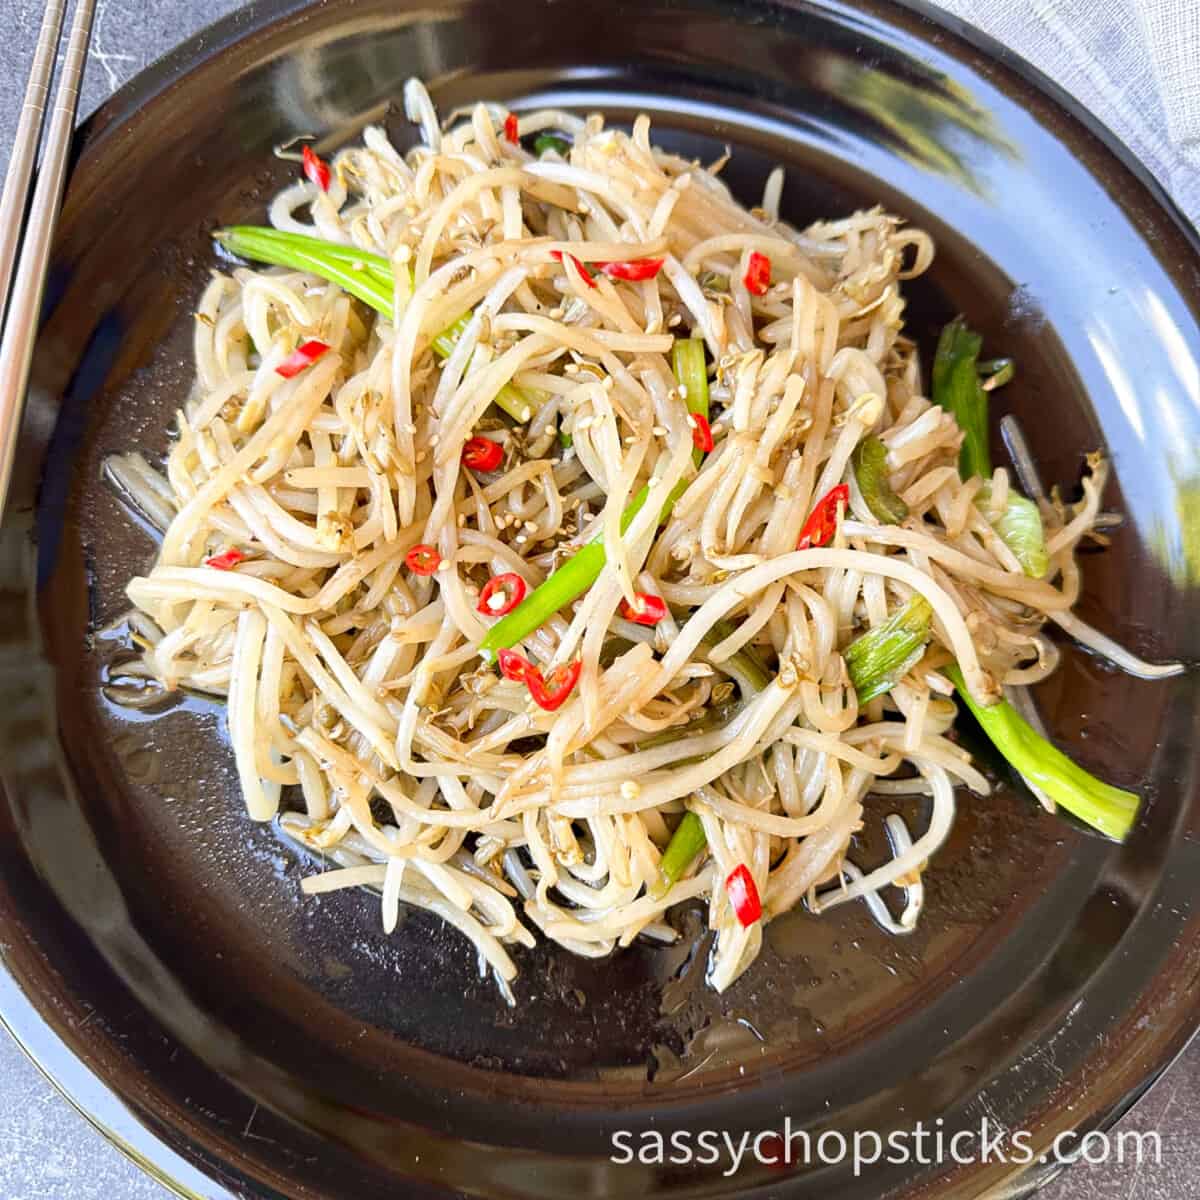 stir fry mung bean sprouts 2